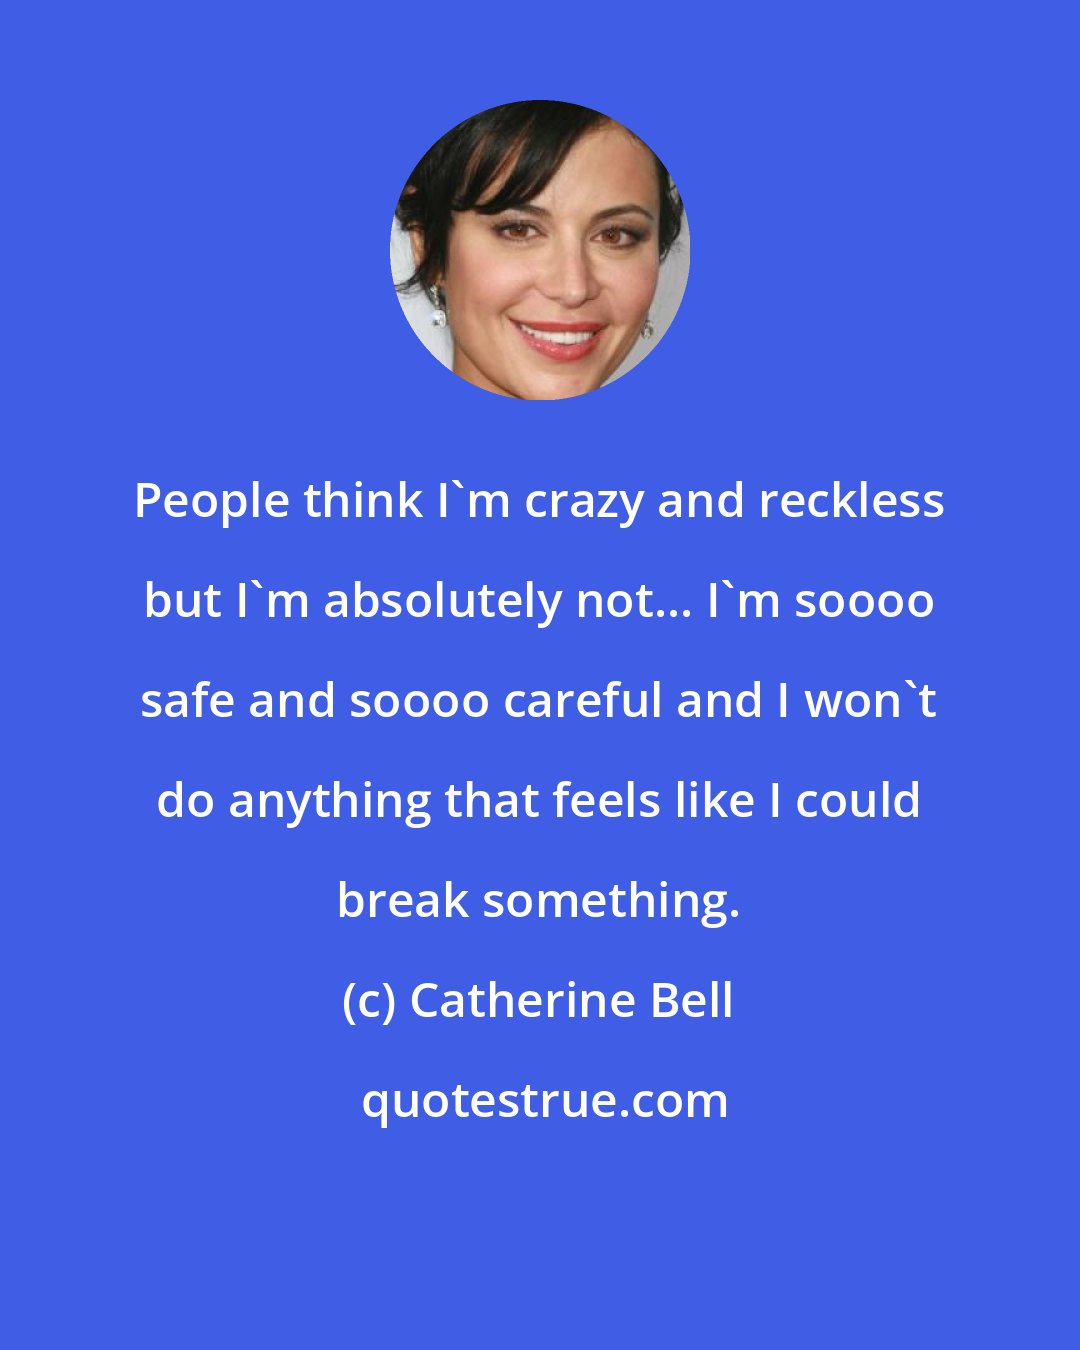 Catherine Bell: People think I'm crazy and reckless but I'm absolutely not... I'm soooo safe and soooo careful and I won't do anything that feels like I could break something.